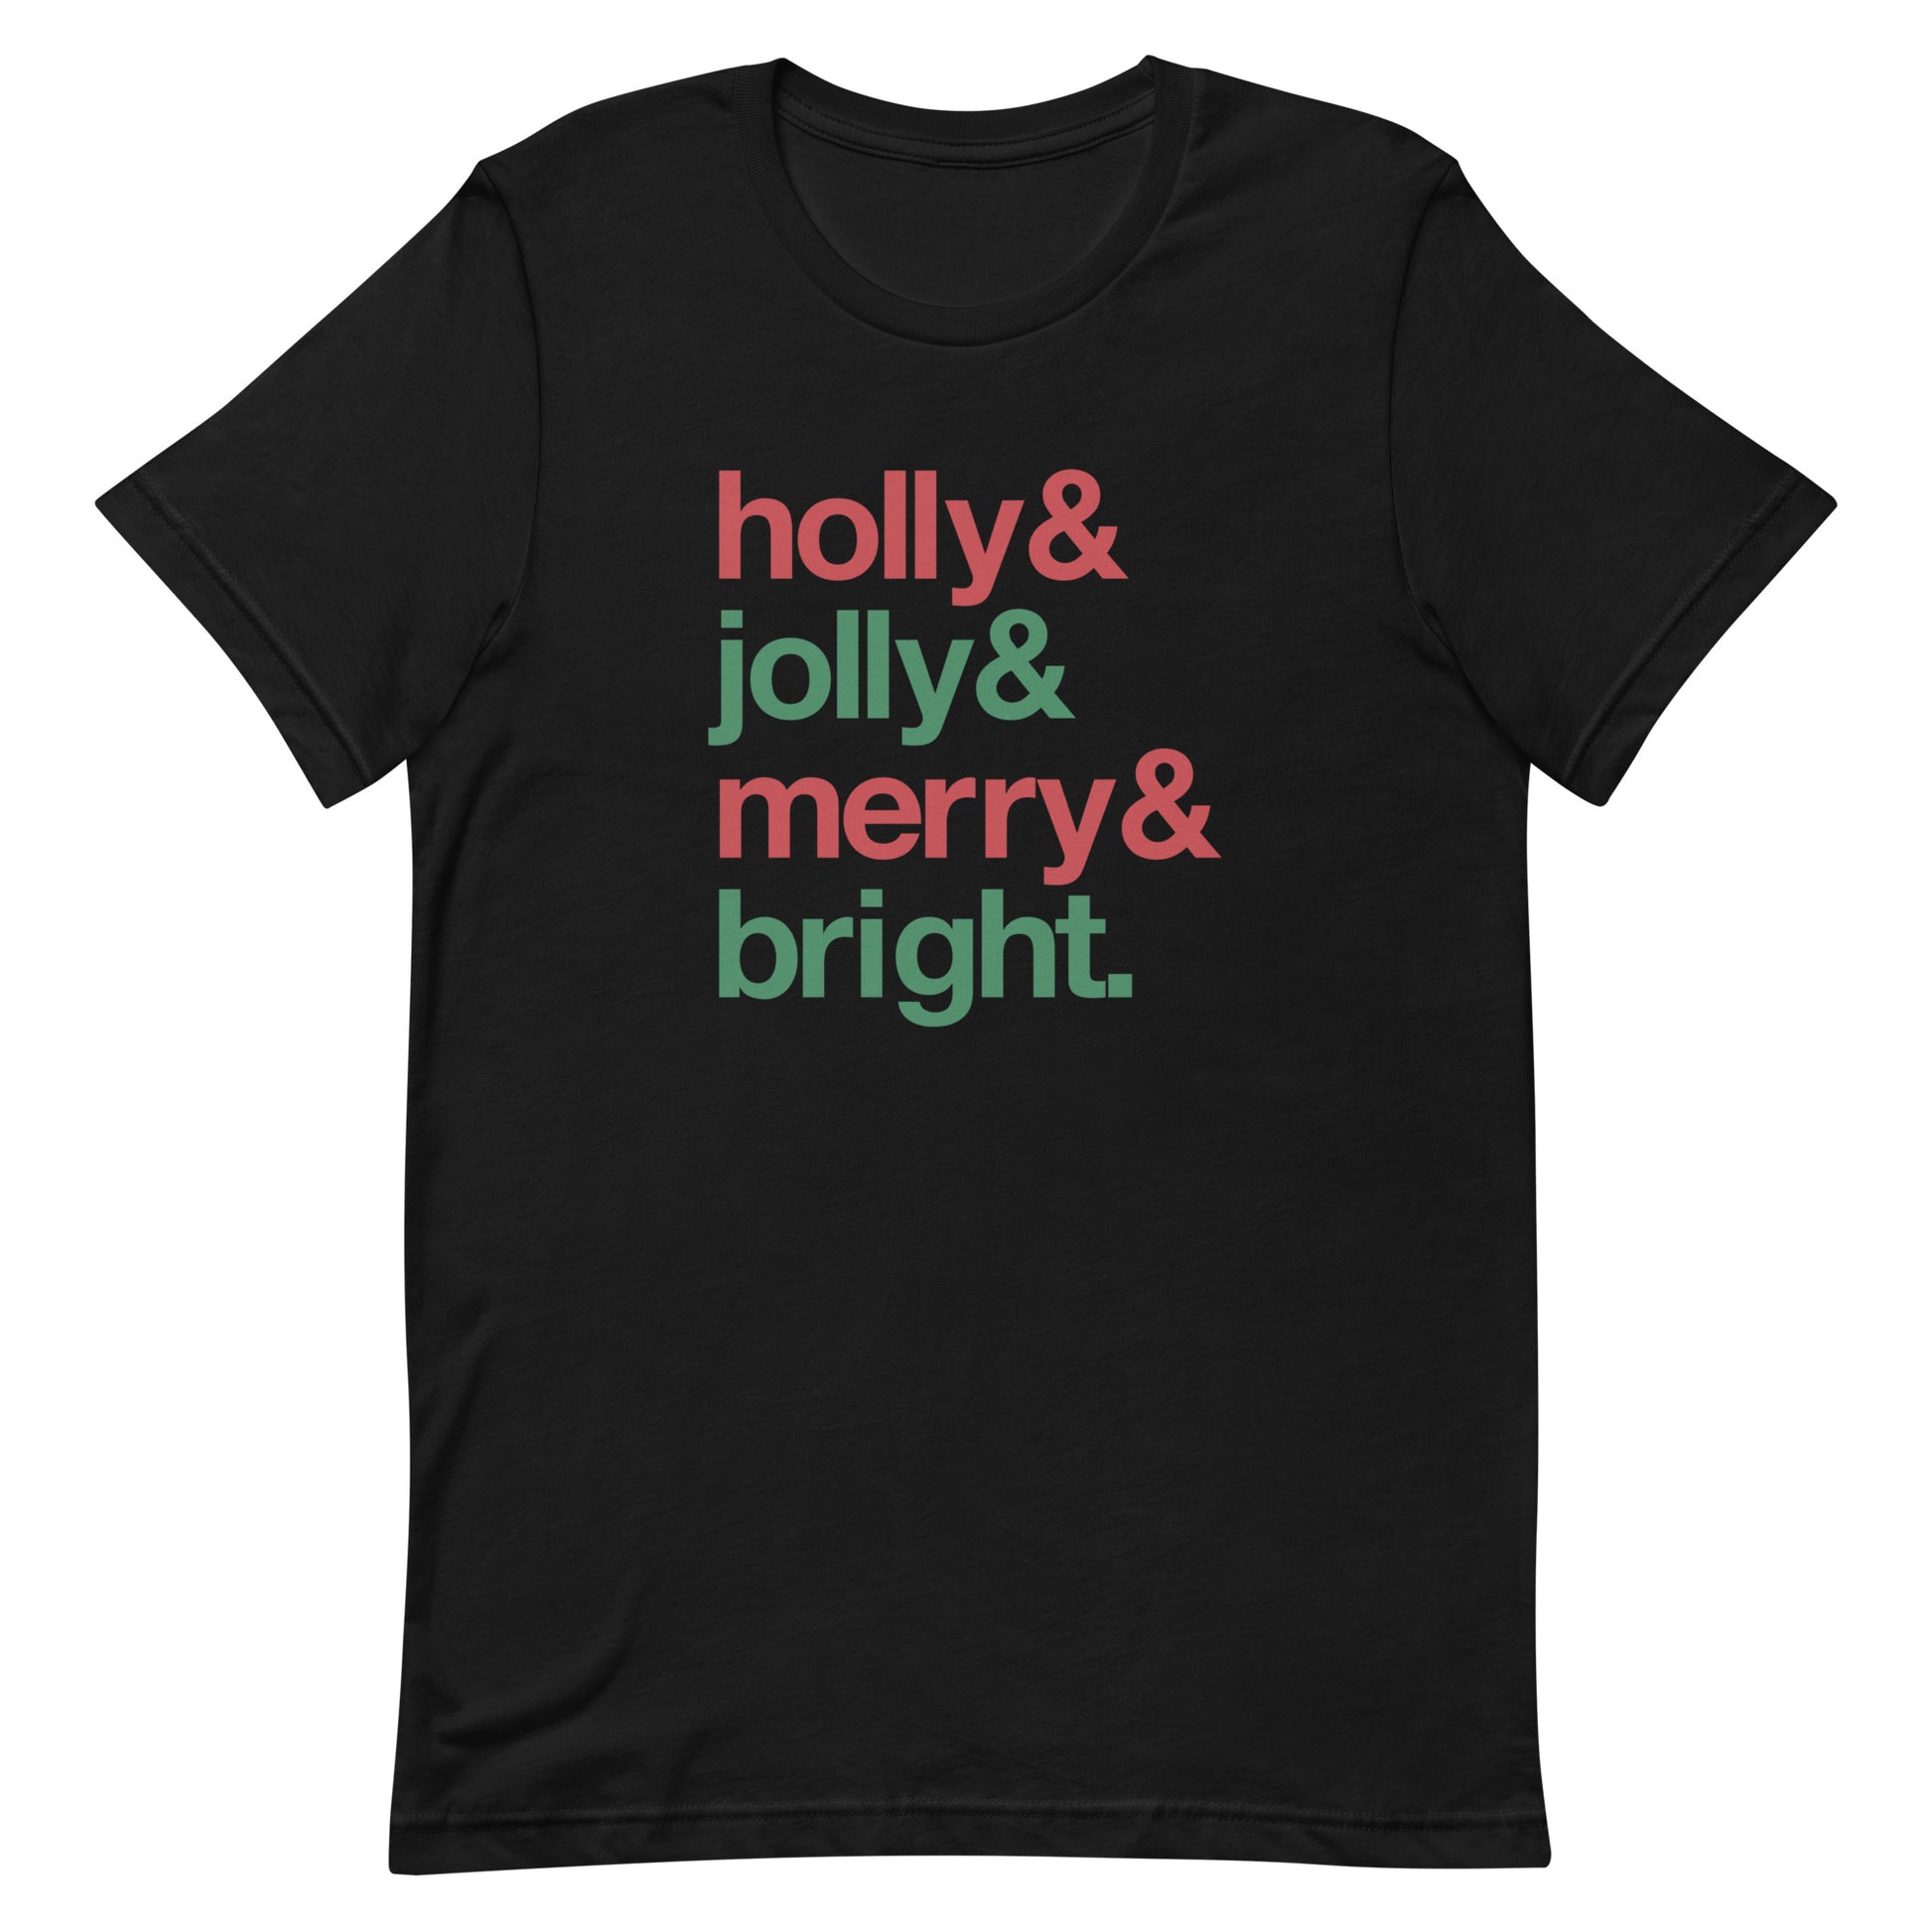 A black crewneck t-shirt with four lines of red and green text that read "Holly & Jolly & Merry & Bright."